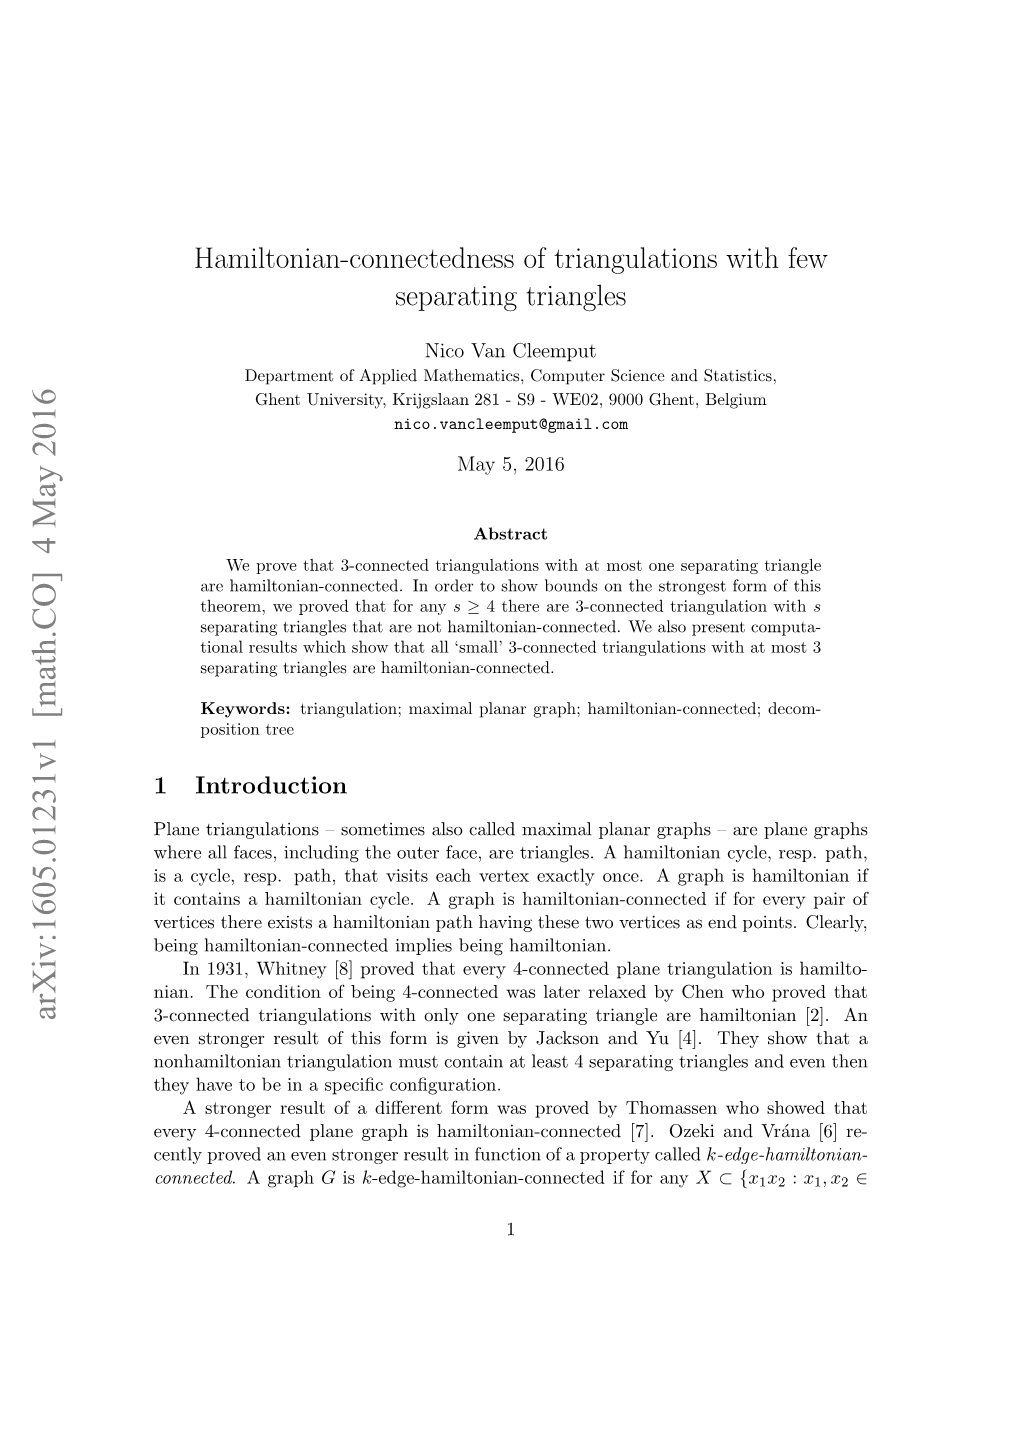 Hamiltonian-Connectedness of Triangulations with Few Separating Triangles